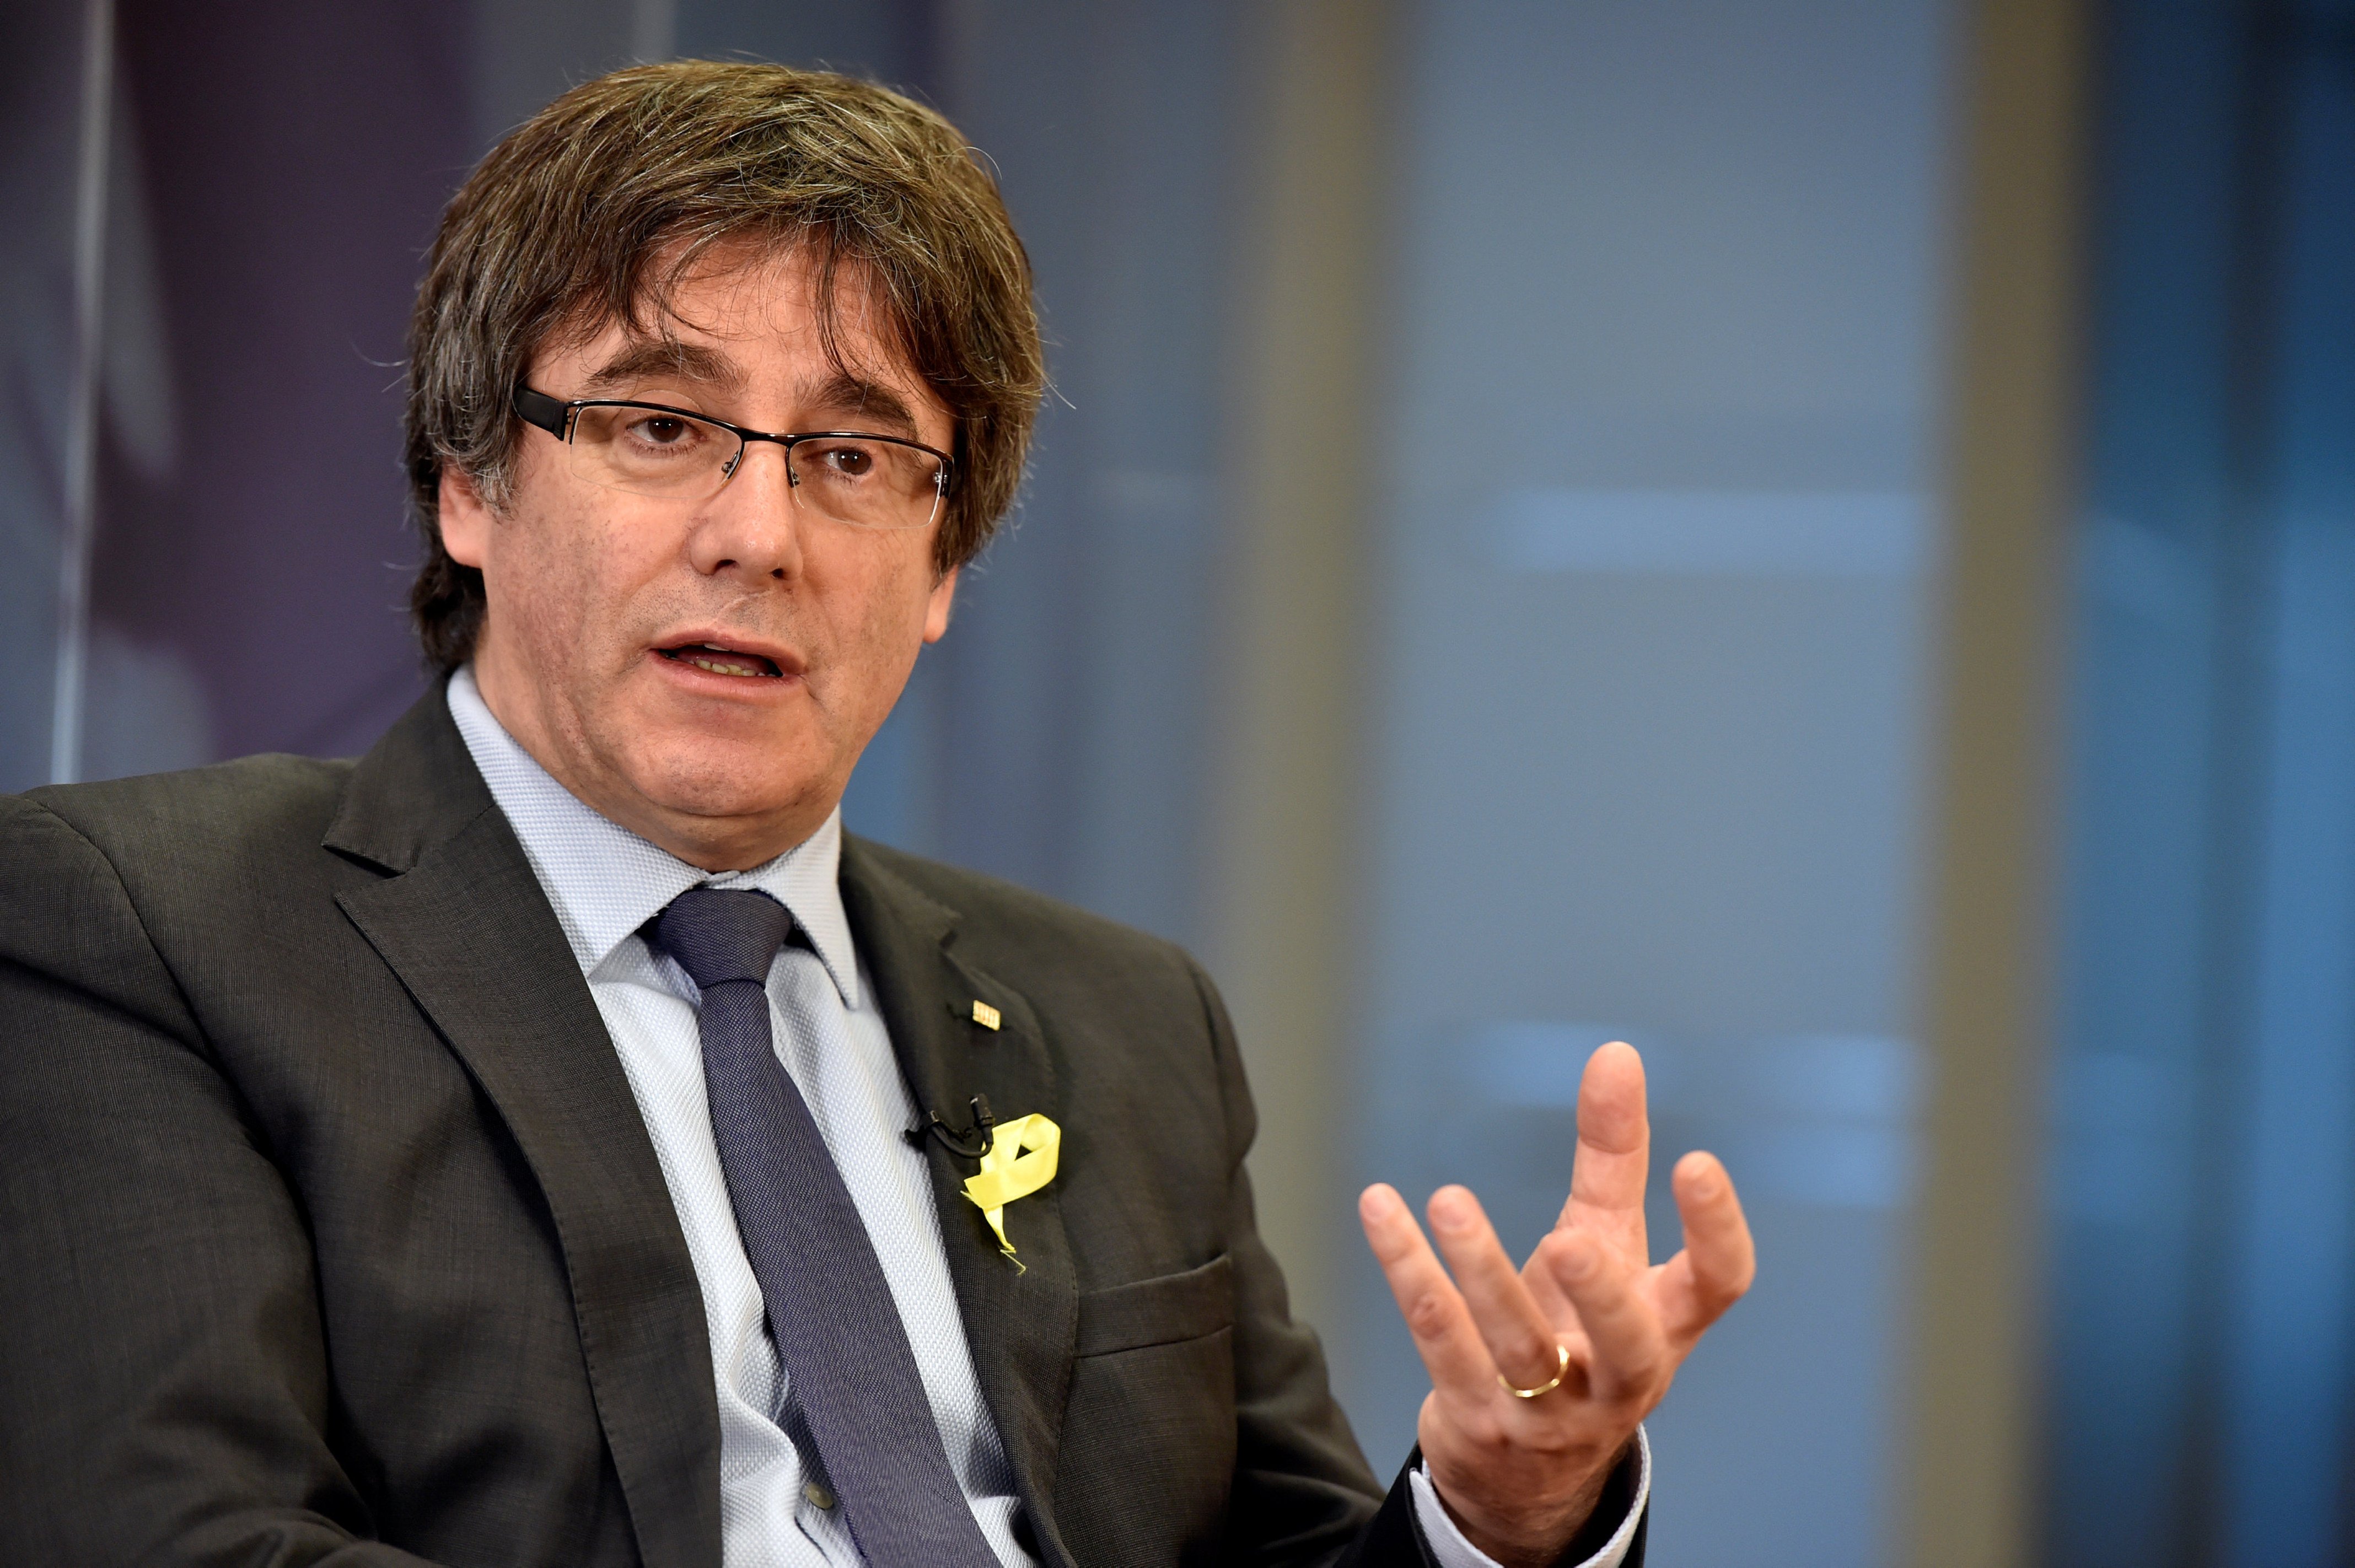 Puigdemont heats up his rhetoric: "They're no longer political prisoners, they're hostages"